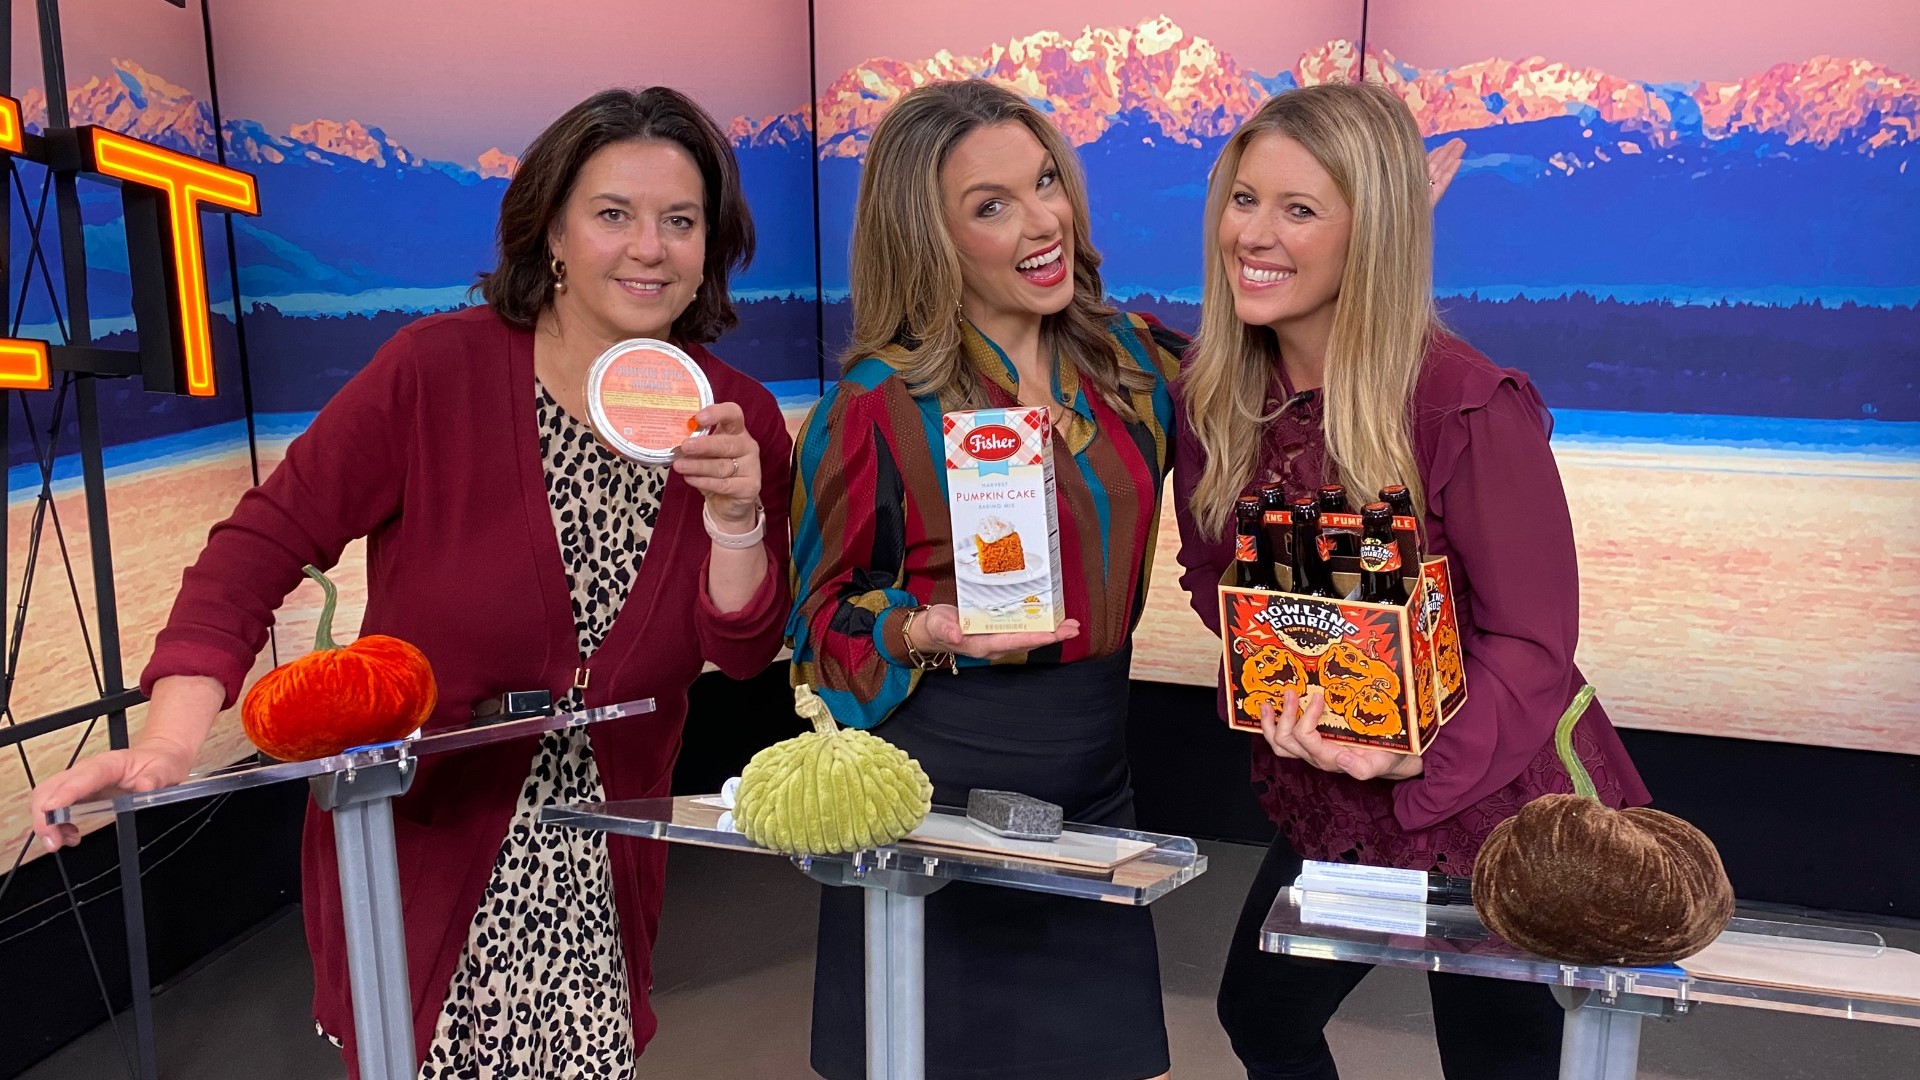 Producer Suzie Wiley and former KING 5 anchor, and Amity's bestie, Natasha Ryan joined Amity for a game of guess how much that costs, fall edition! #newdaynw